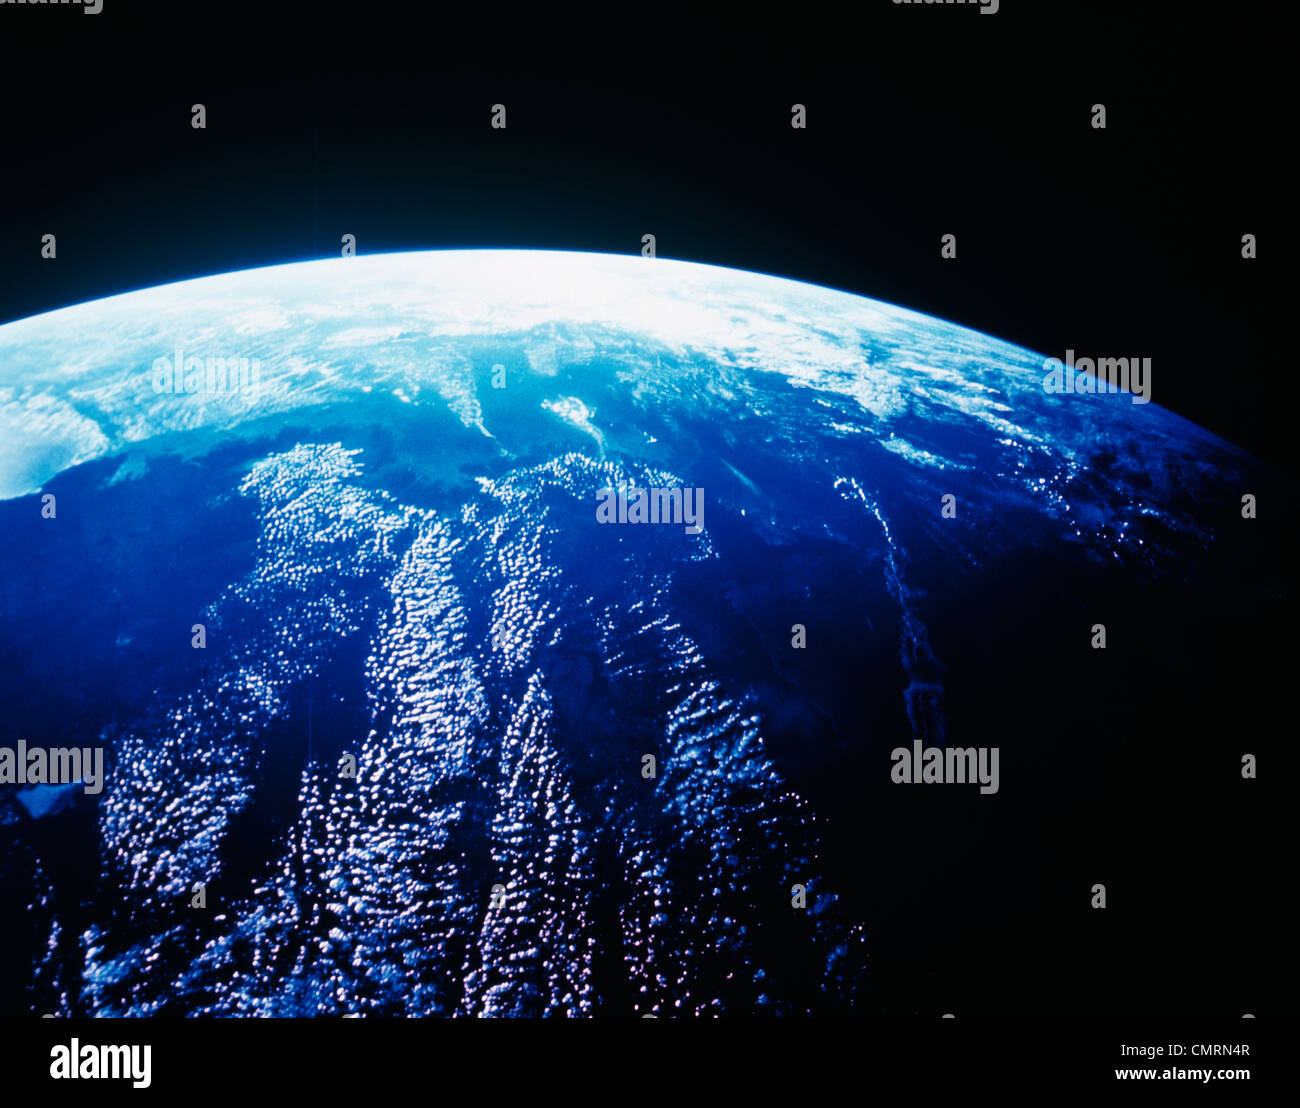 EARTH FROM OUTER SPACE SHOWING BLUE OCEAN SURFACE WITH CLOUDS AND CURVED HORIZON Stock Photo